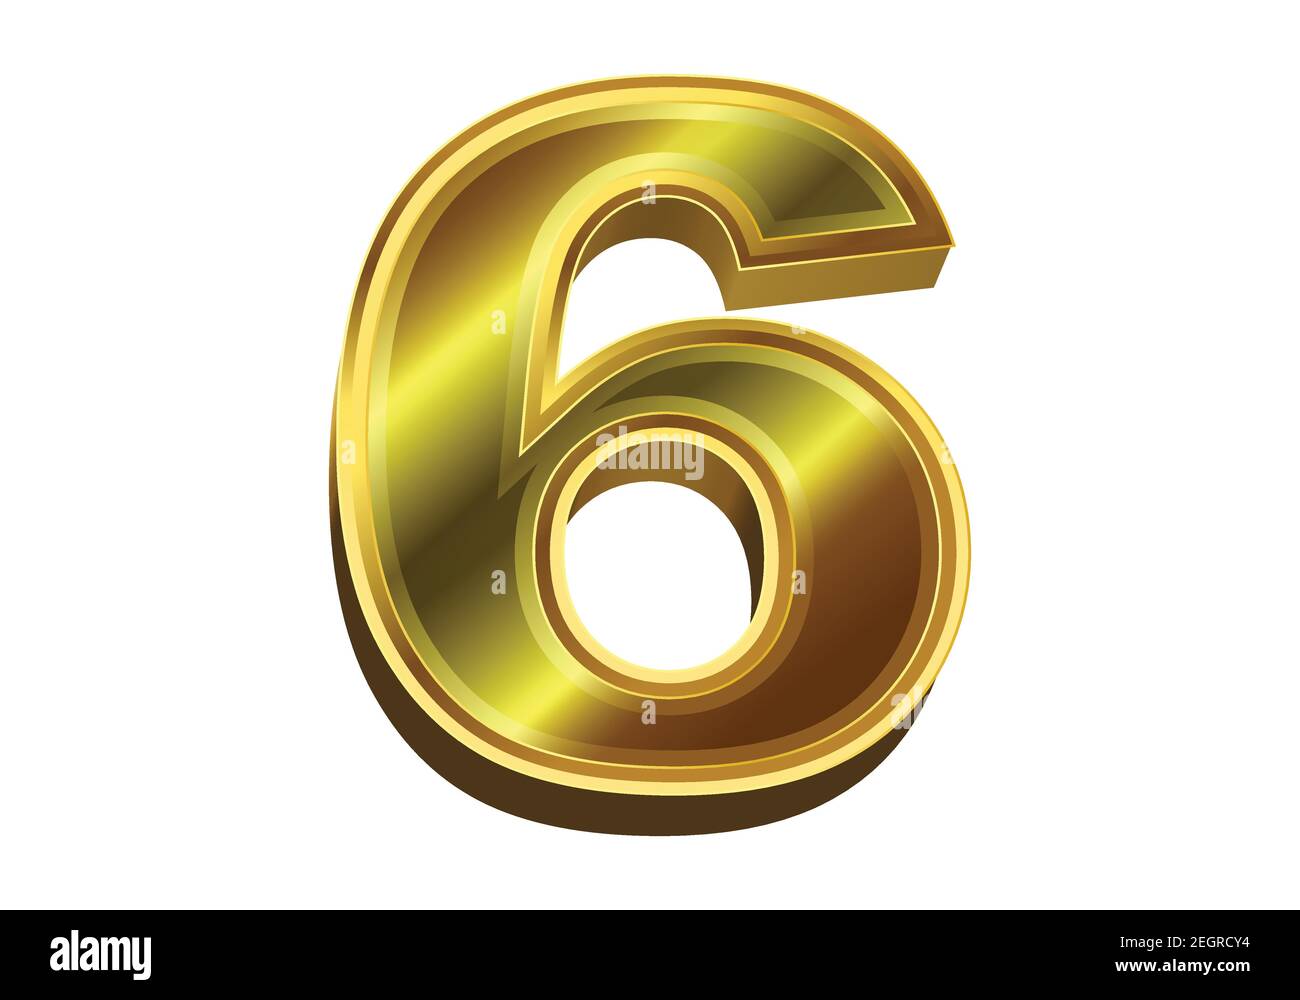 3d golden number 6 isolated on white background Stock Vector